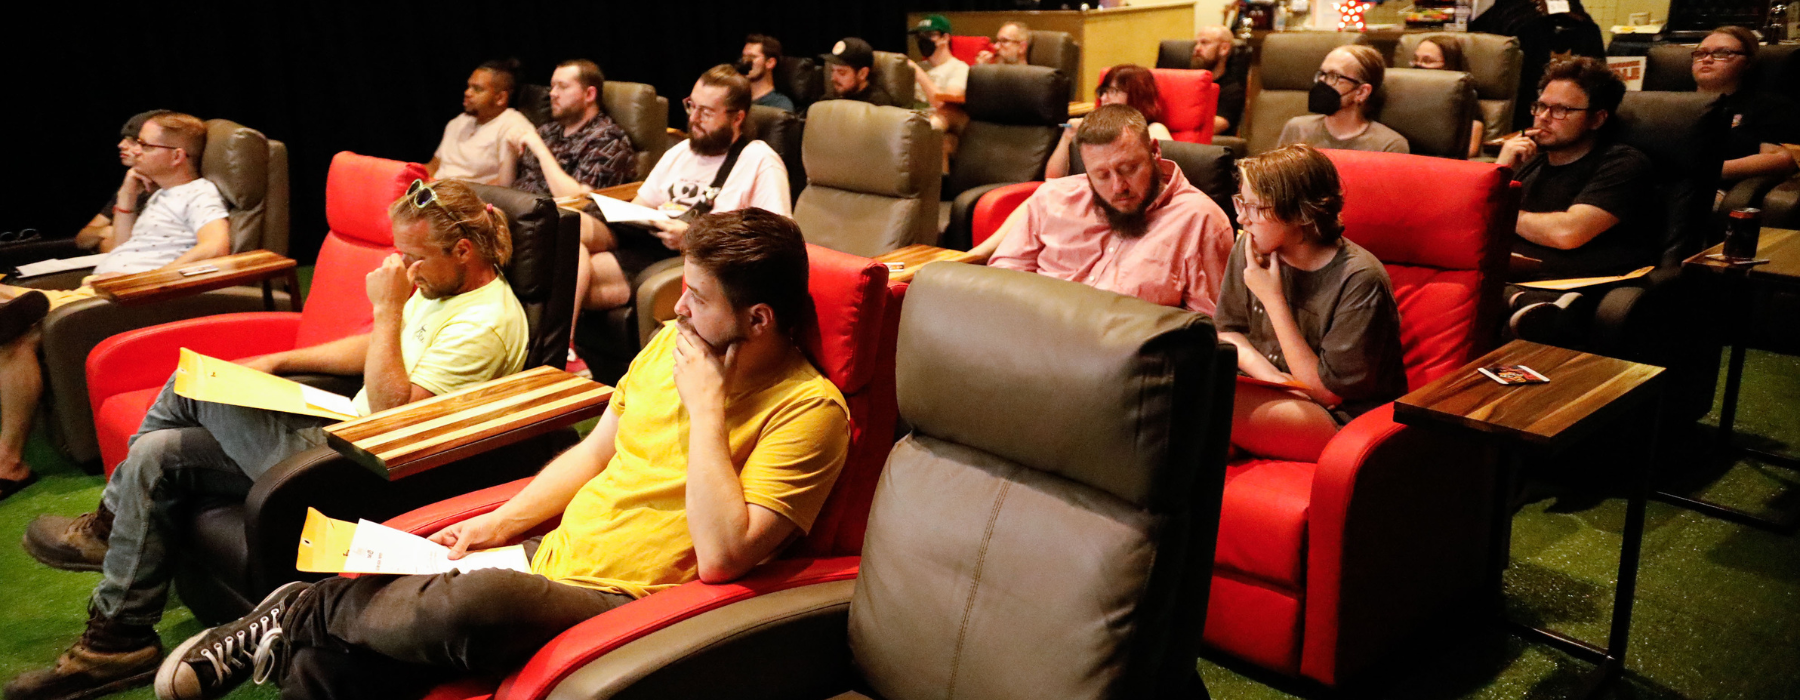 Audience sits in recliners in a theatre.